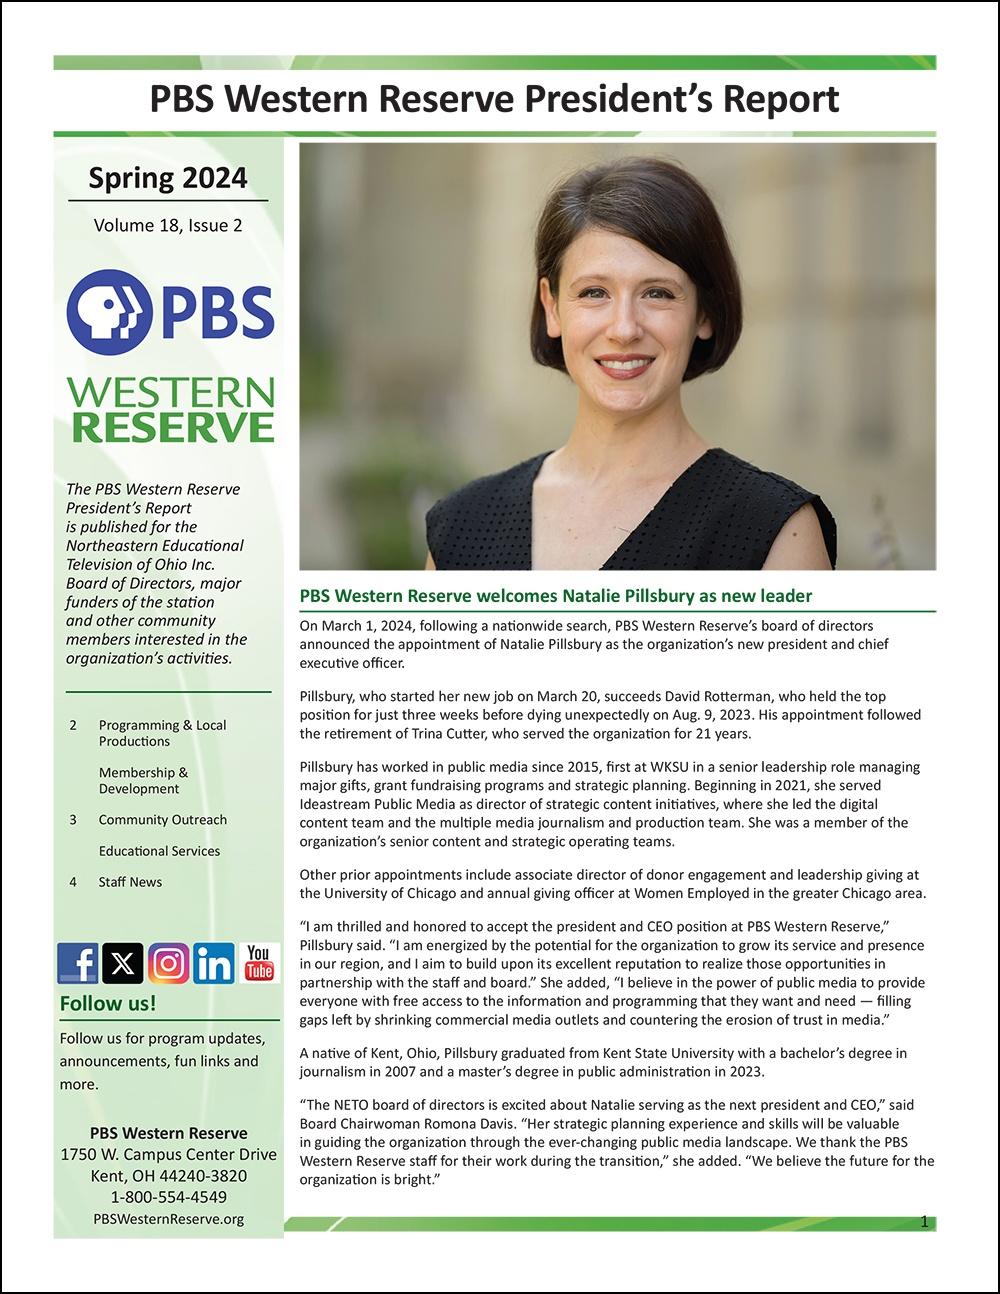 PBS Western Reserve President's Report - Spring 2024